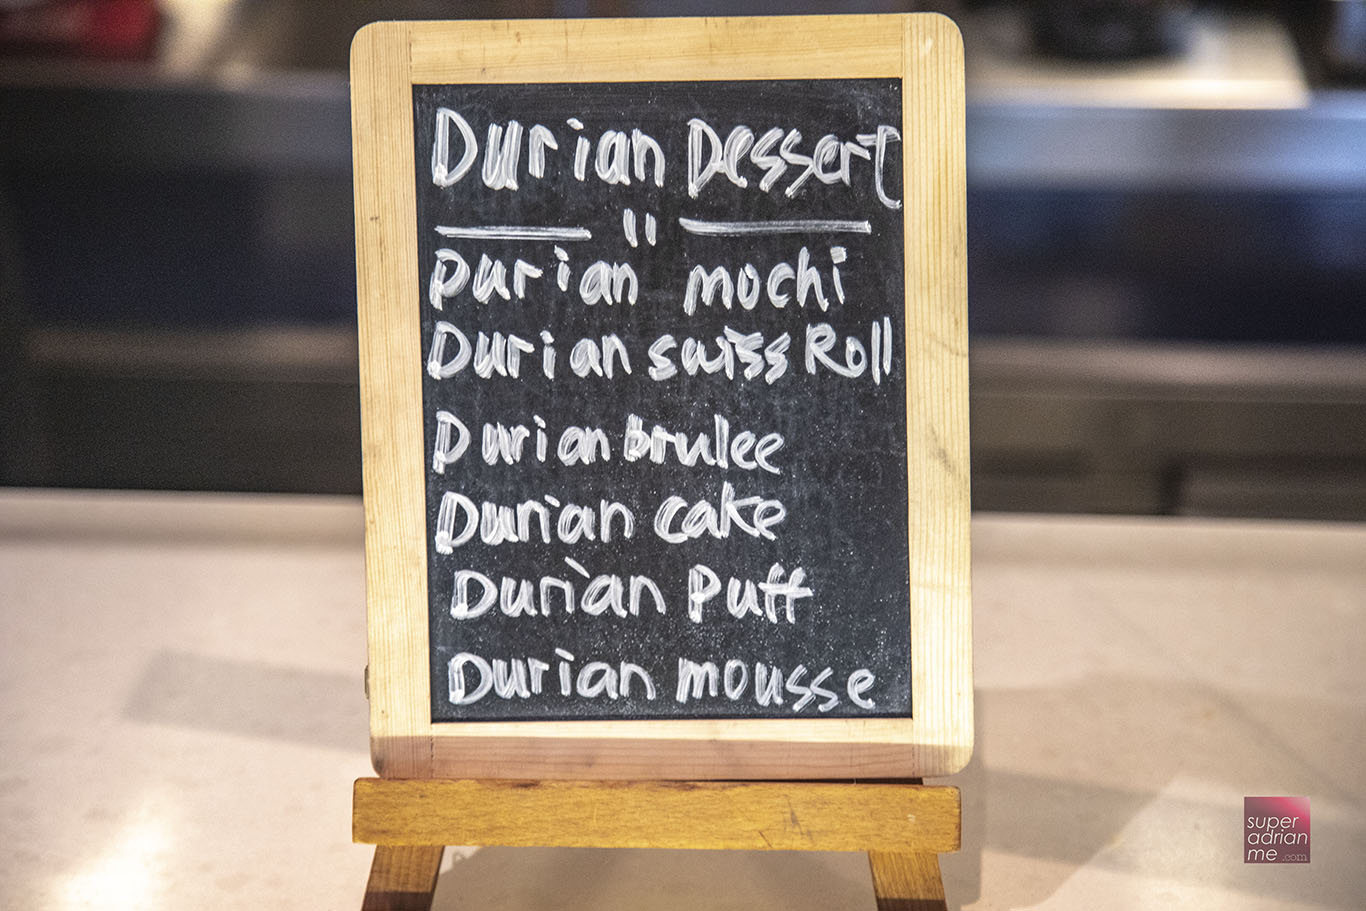 Durian Season is Back at Marriott Cafe in Singapore